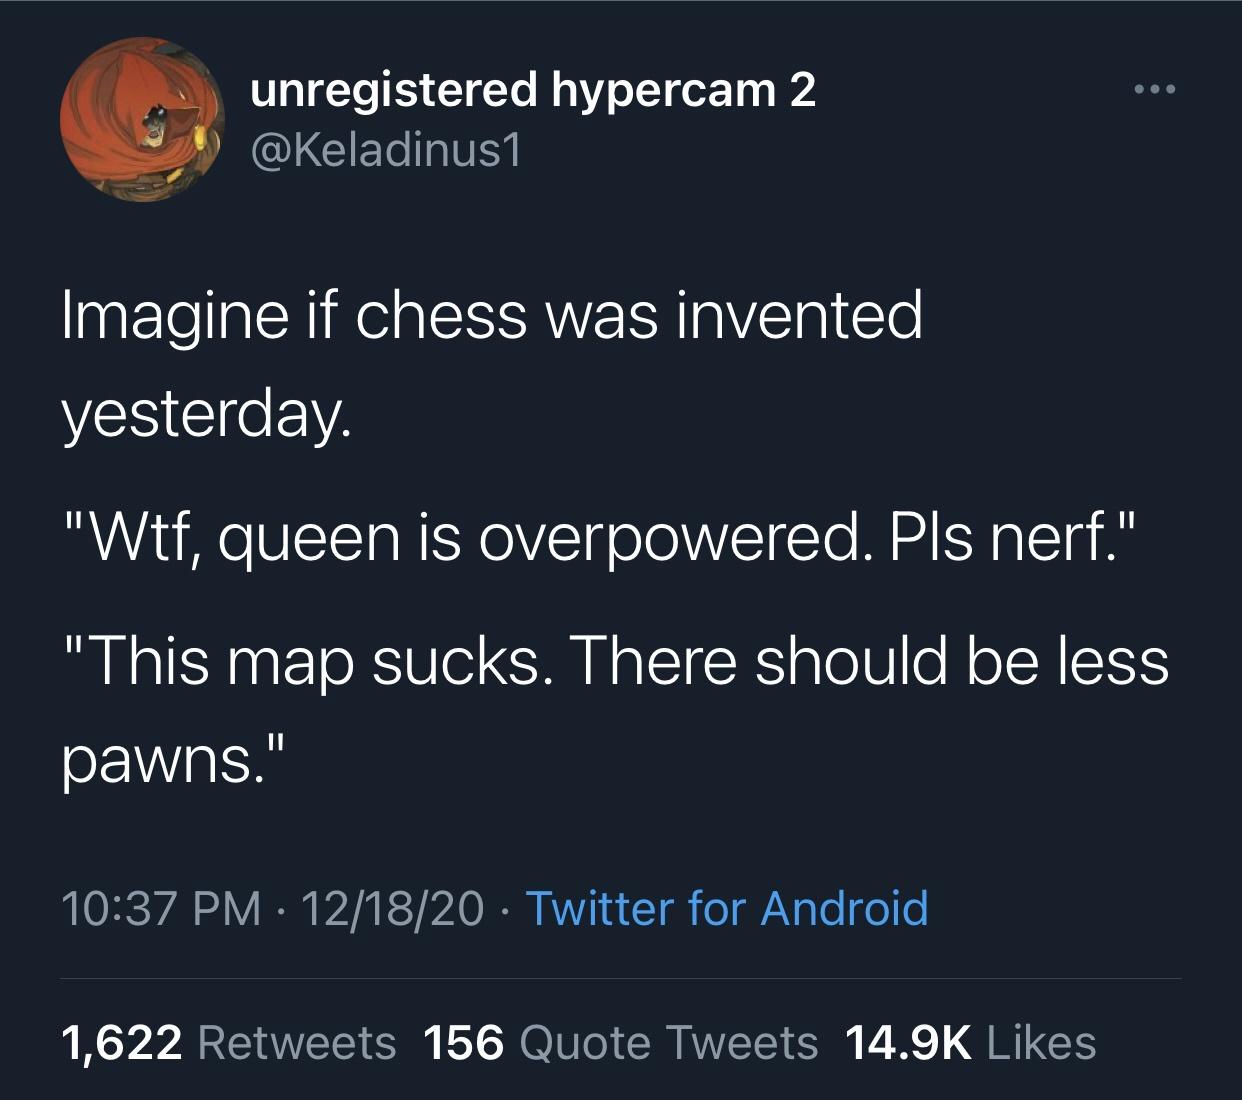 atmosphere - unregistered hypercam 2 Imagine if chess was invented yesterday. "Wtf, queen is overpowered. Pls nerf." "This map sucks. There should be less pawns." 121820 Twitter for Android 1,622 156 Quote Tweets